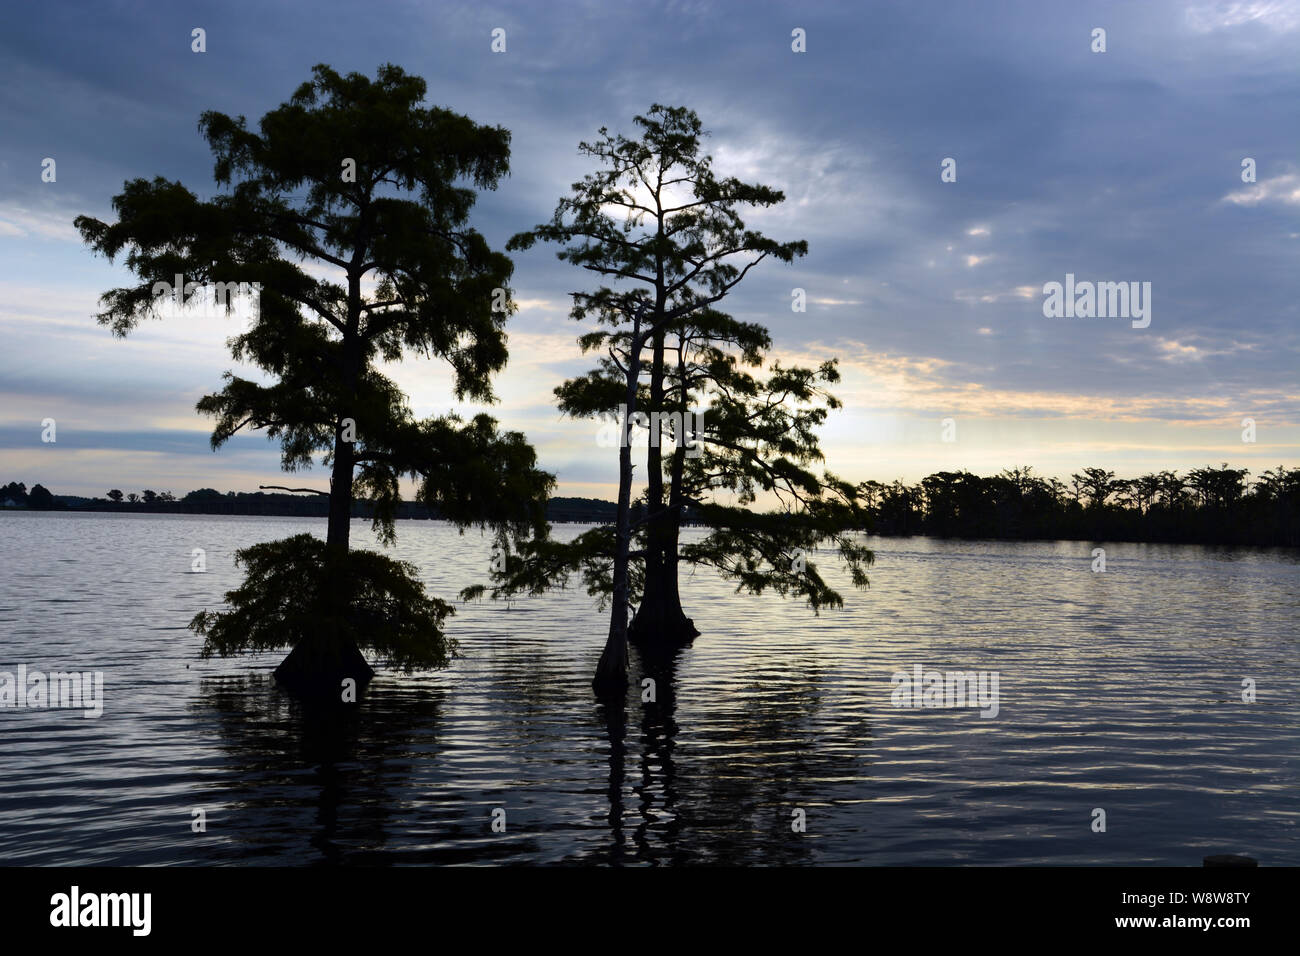 Cypress trees are silhouetted against morning clouds on the Perquimans River outside the small town of Hertford in North Carolina. Stock Photo